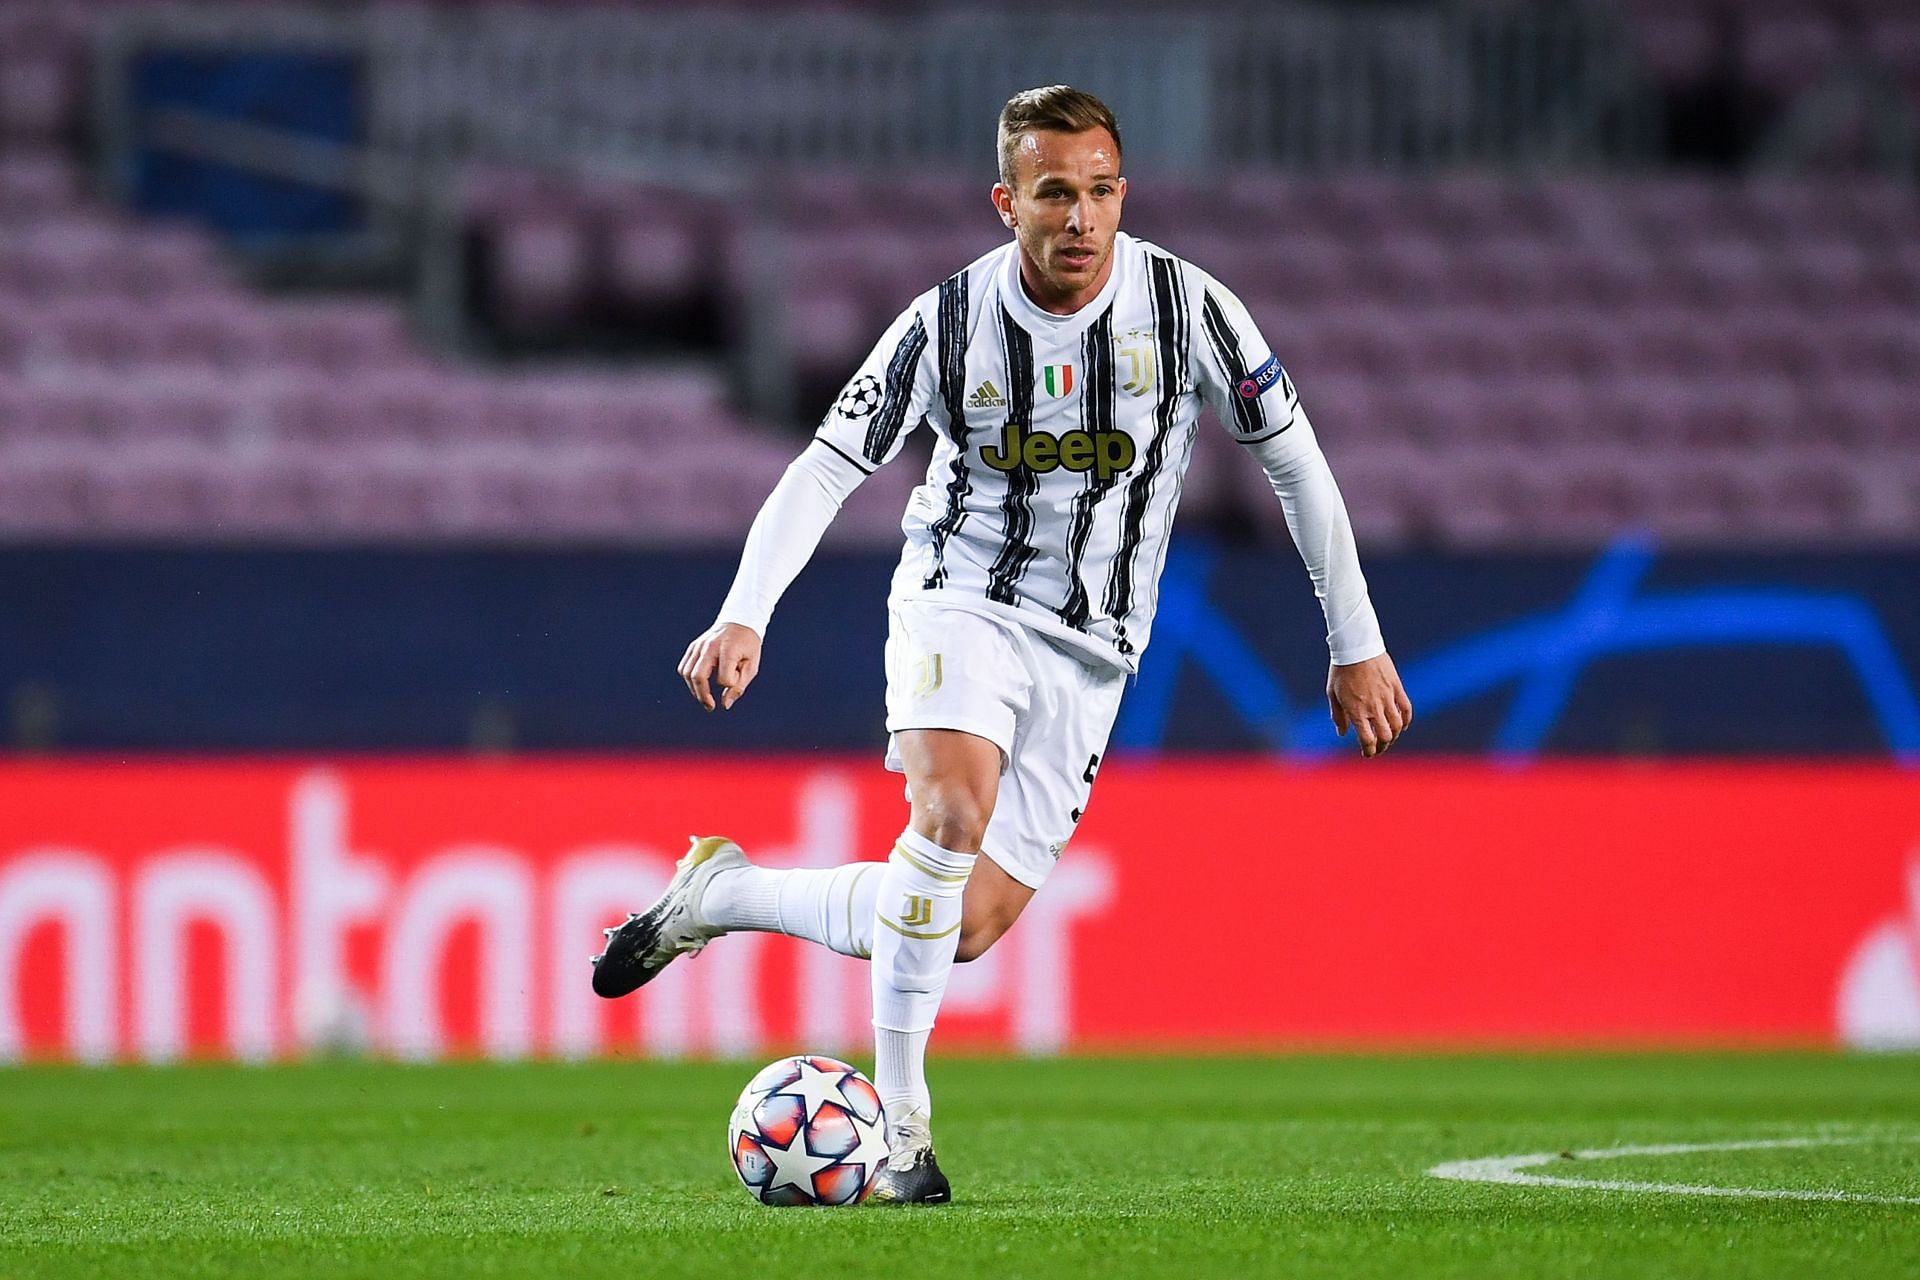 Arsenal have received a boost in their pursuit of Arthur Melo.